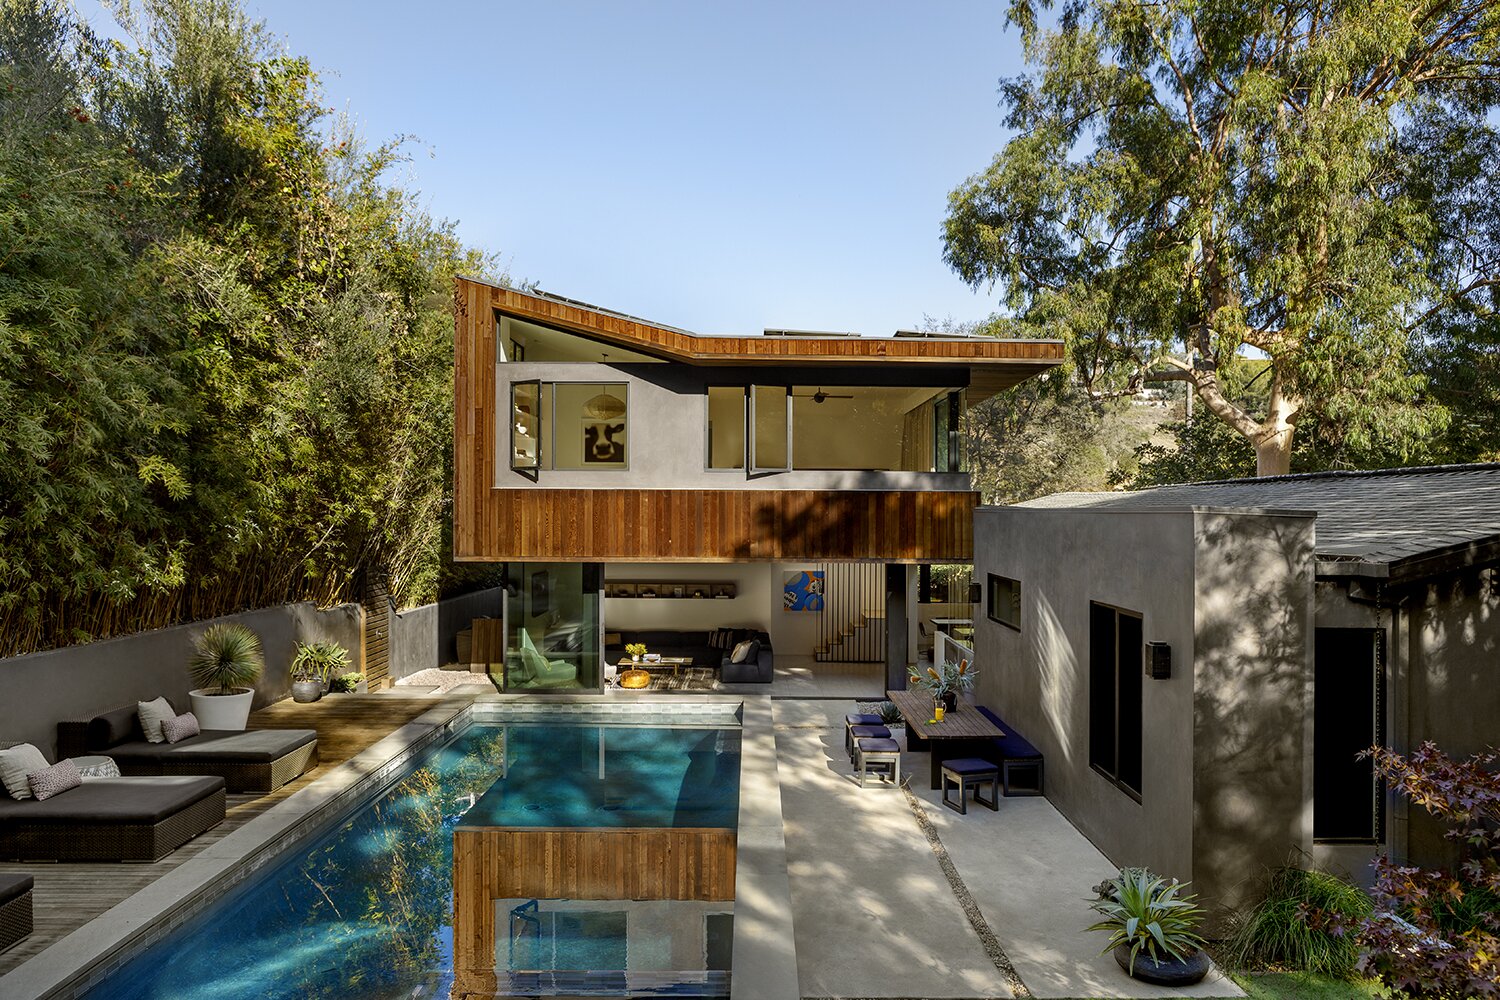 A Sustainable Renovation of a Los Angeles Midcentury Channels Its Designers’ Utopian Ideals